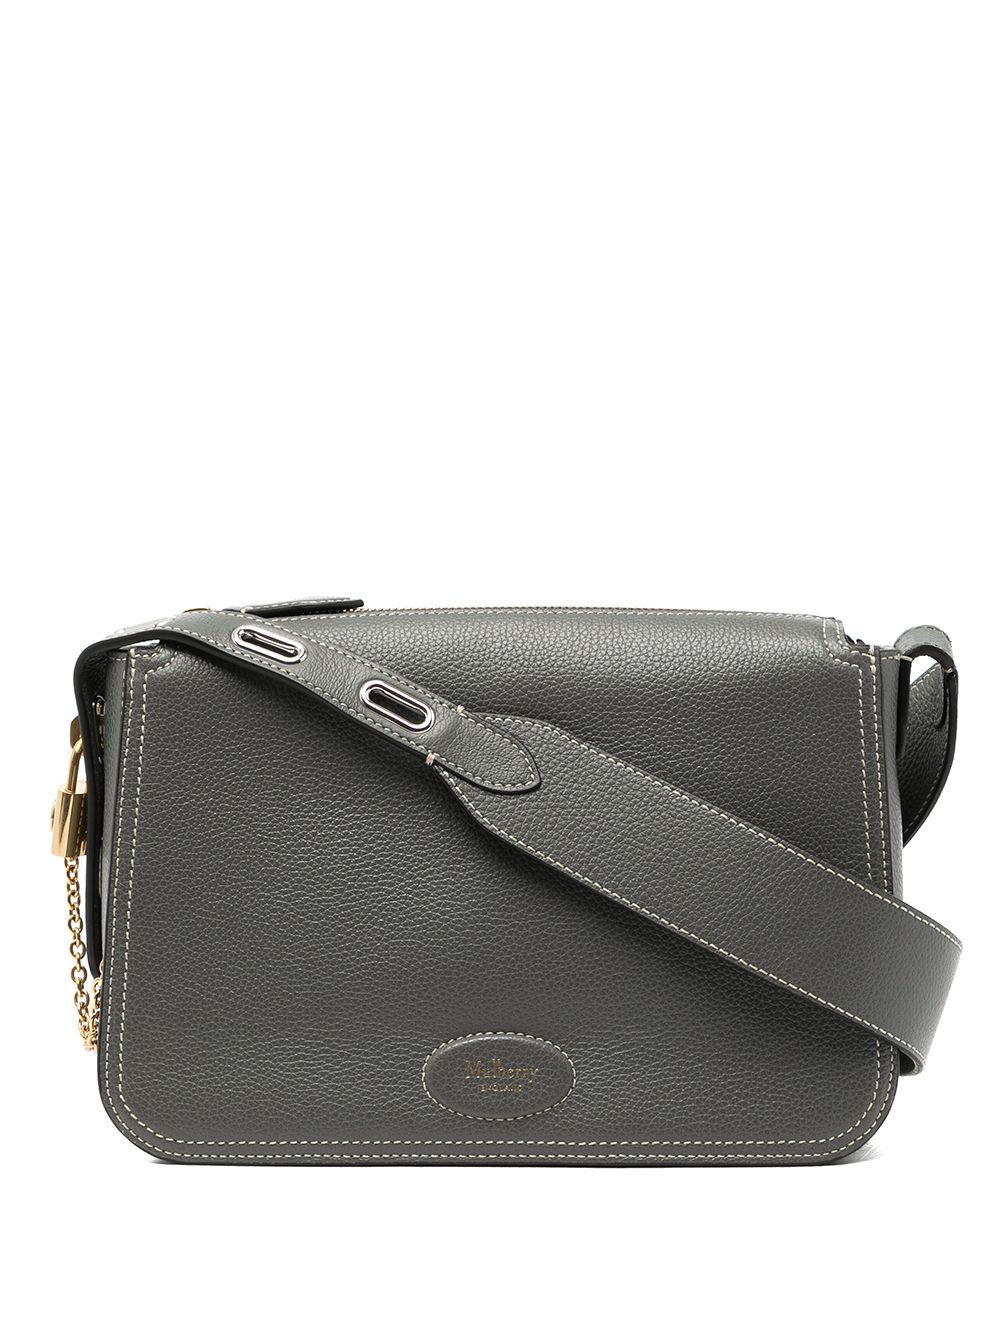 Mulberry small Billie leather crossbody bag - Grey von Mulberry